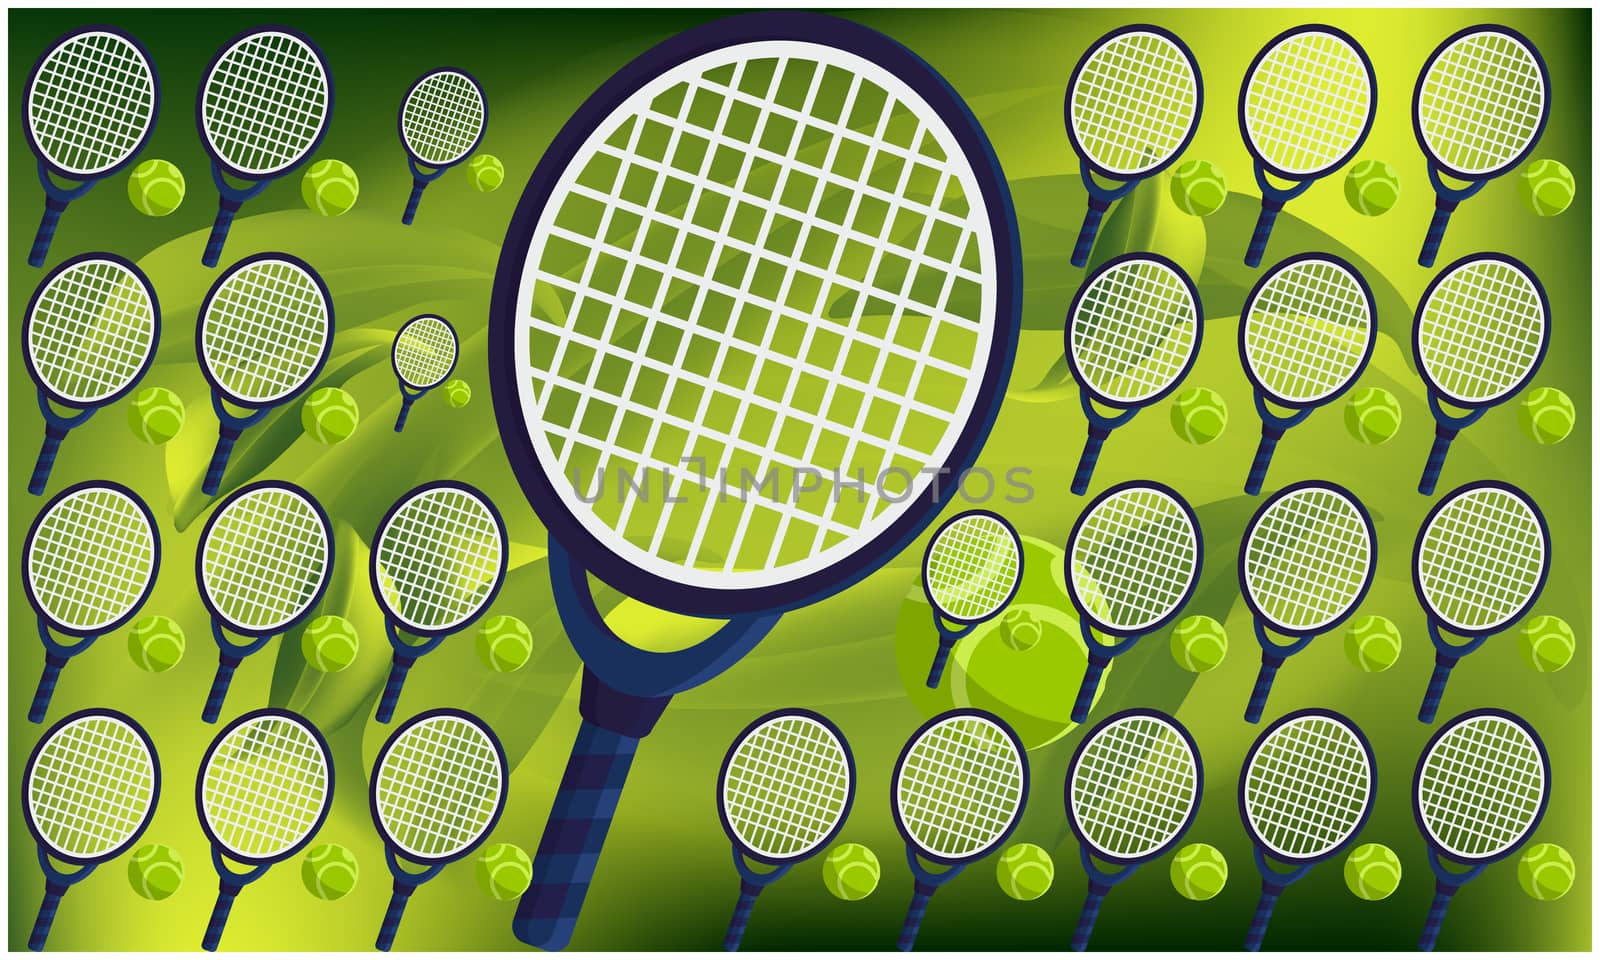 digital textile design of tennis equipment on abstract background by aanavcreationsplus